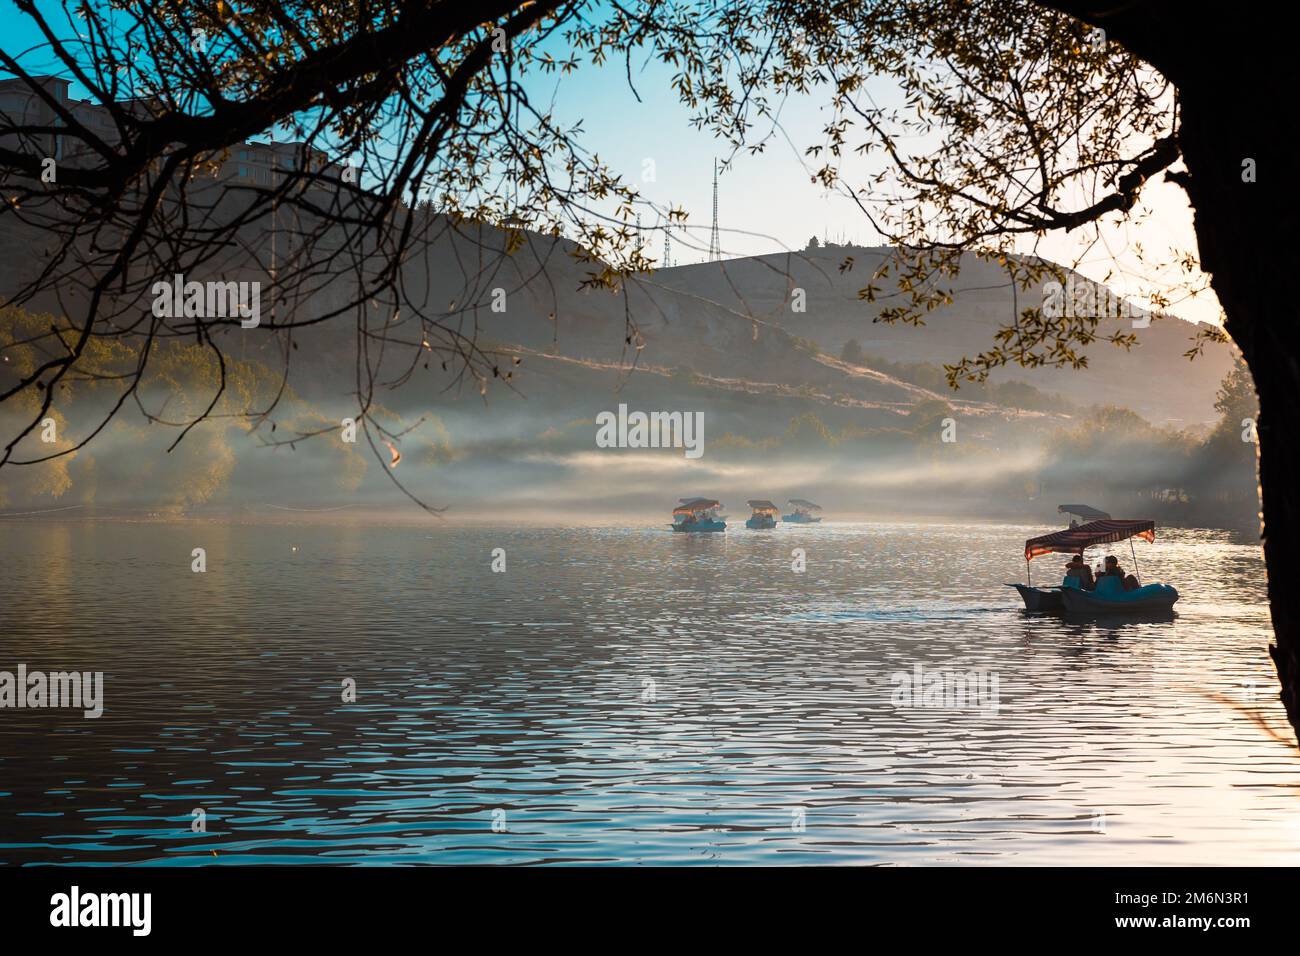 Paddleboats on the lake at sunset. Travel or weekend activity concept photo. Haze or mist on the lake. Stock Photo